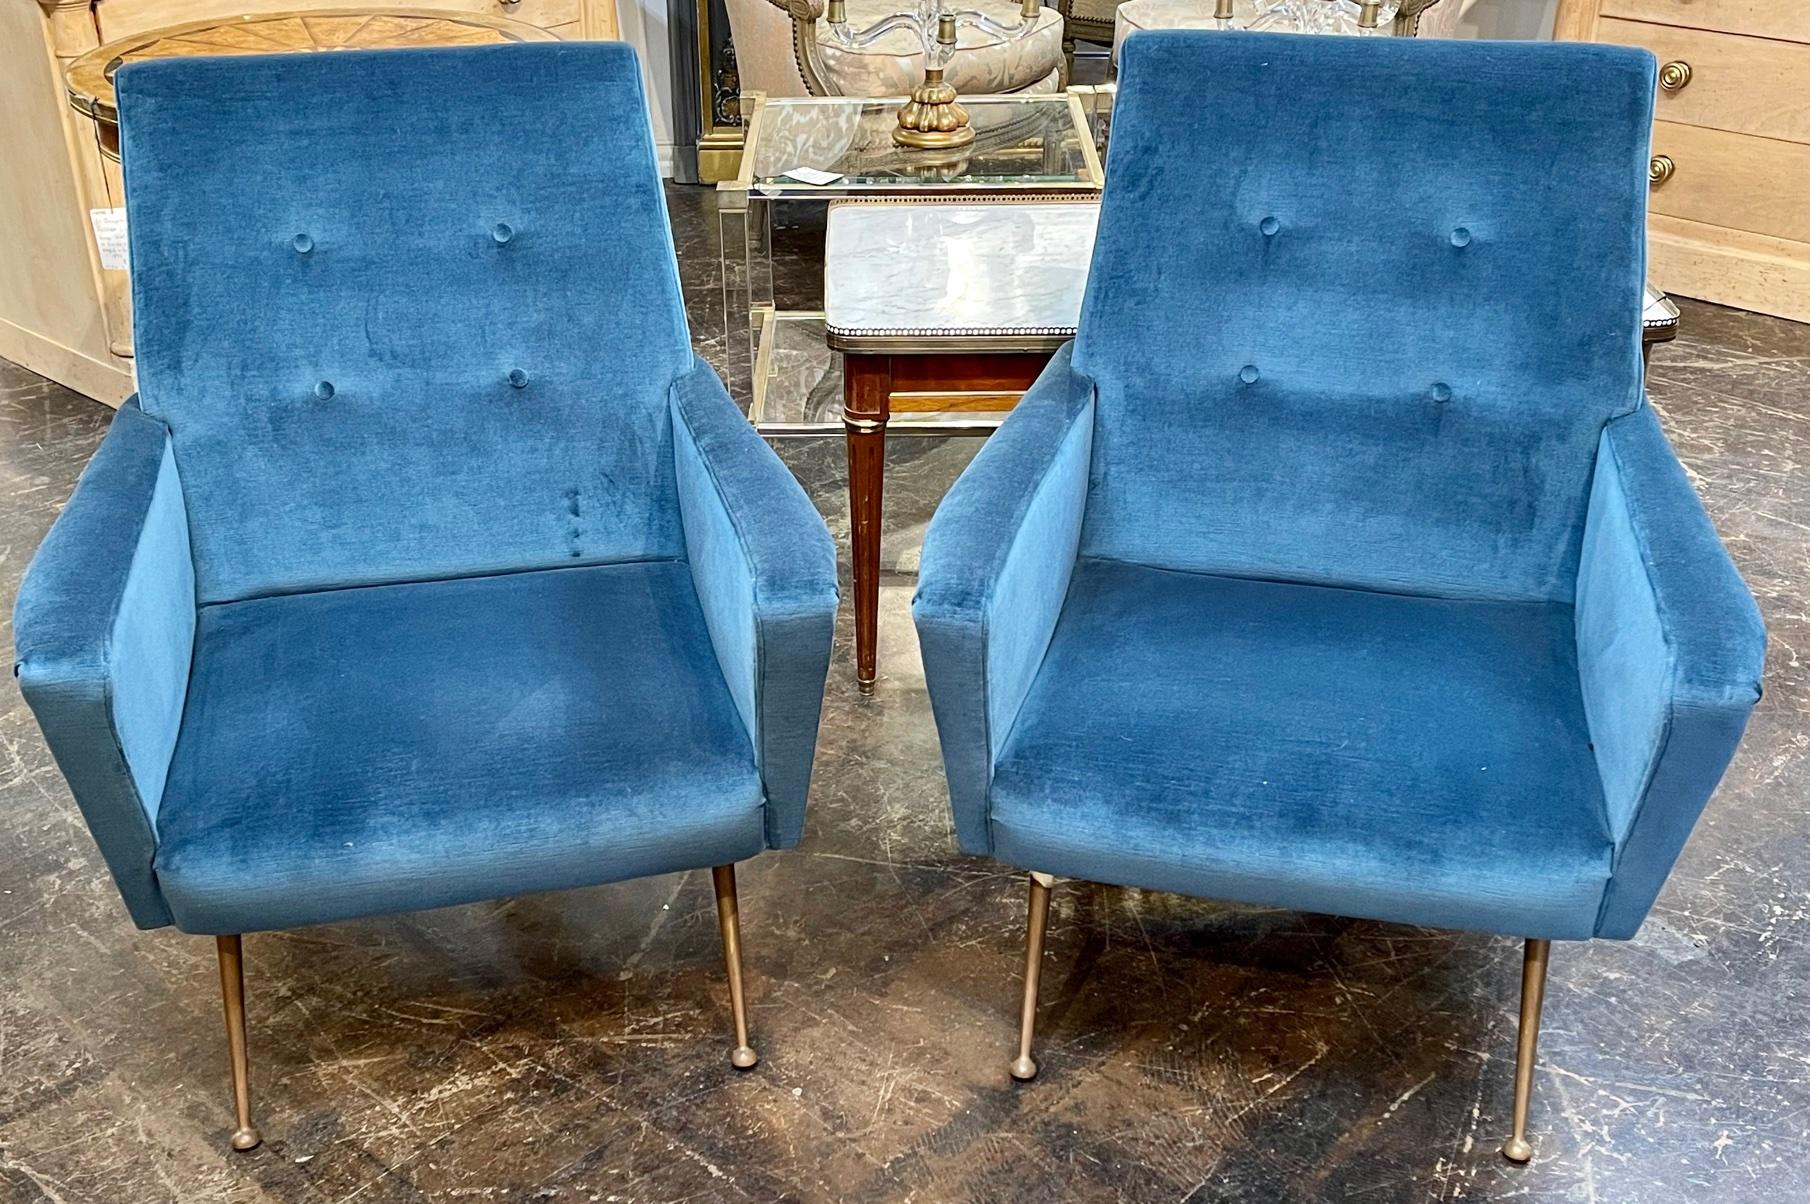 Pair of Italian mid-century arm-chairs after designer Mario Zanuso. Circa 1960. Perfect for todays eclectic design!